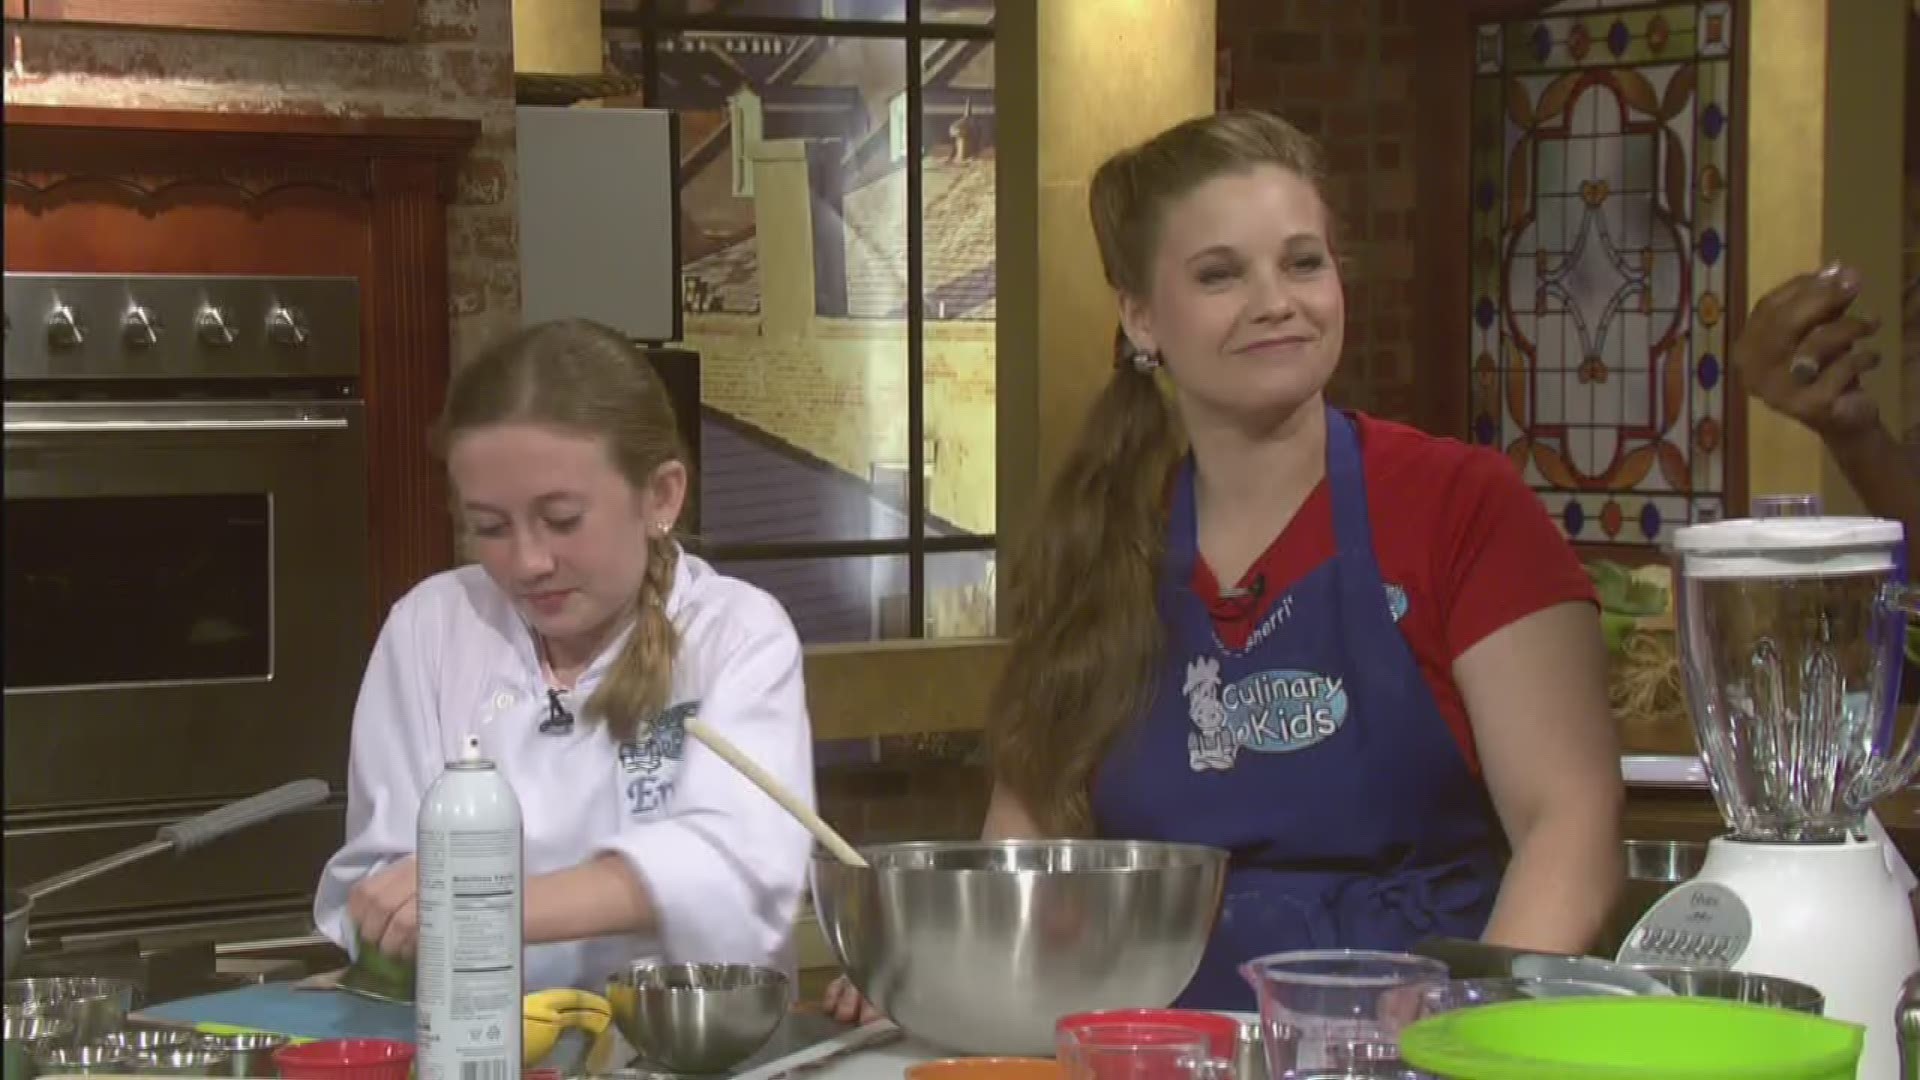 It is a fun way to get kids interested in cooking. Owner Sherri Hansen talks about the program, and her student Emily Roche tells us about competing in the upcoming season of Chopped Junior on the Food Network.